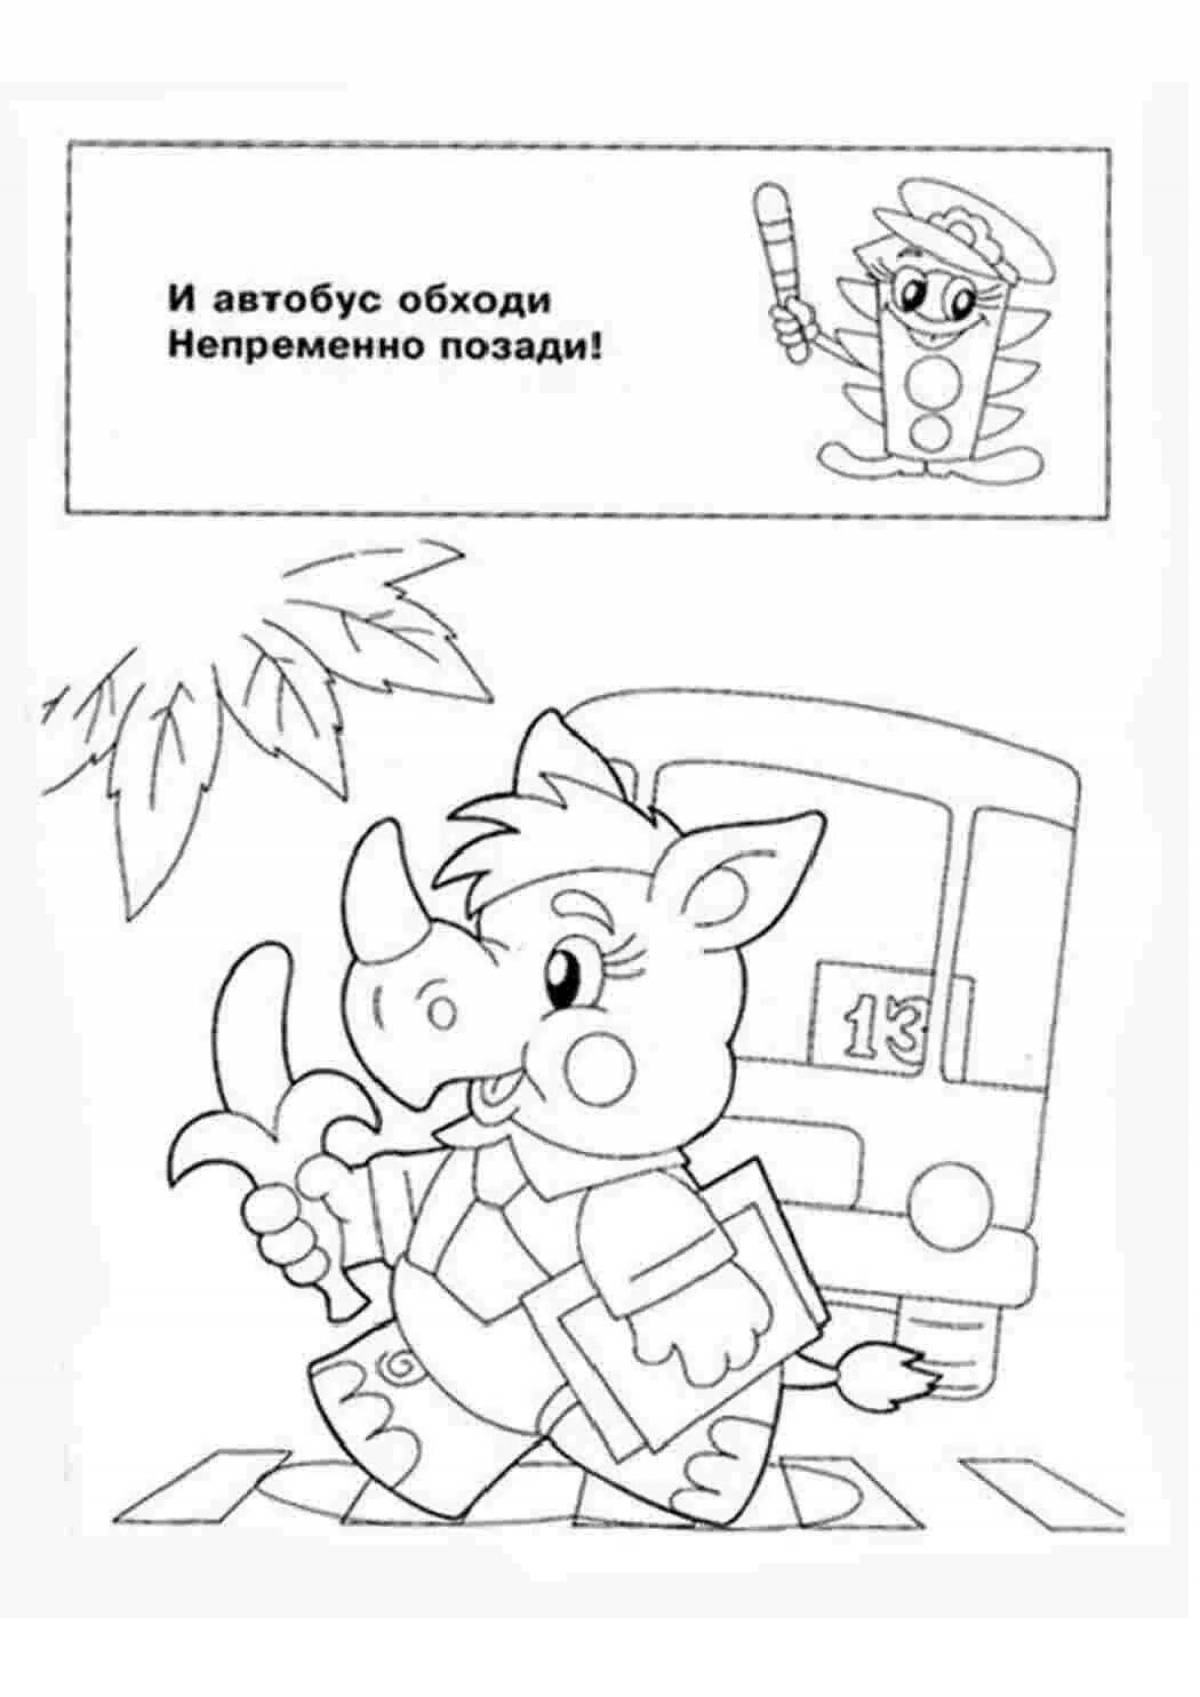 Drawings for kids traffic rules for kids #11